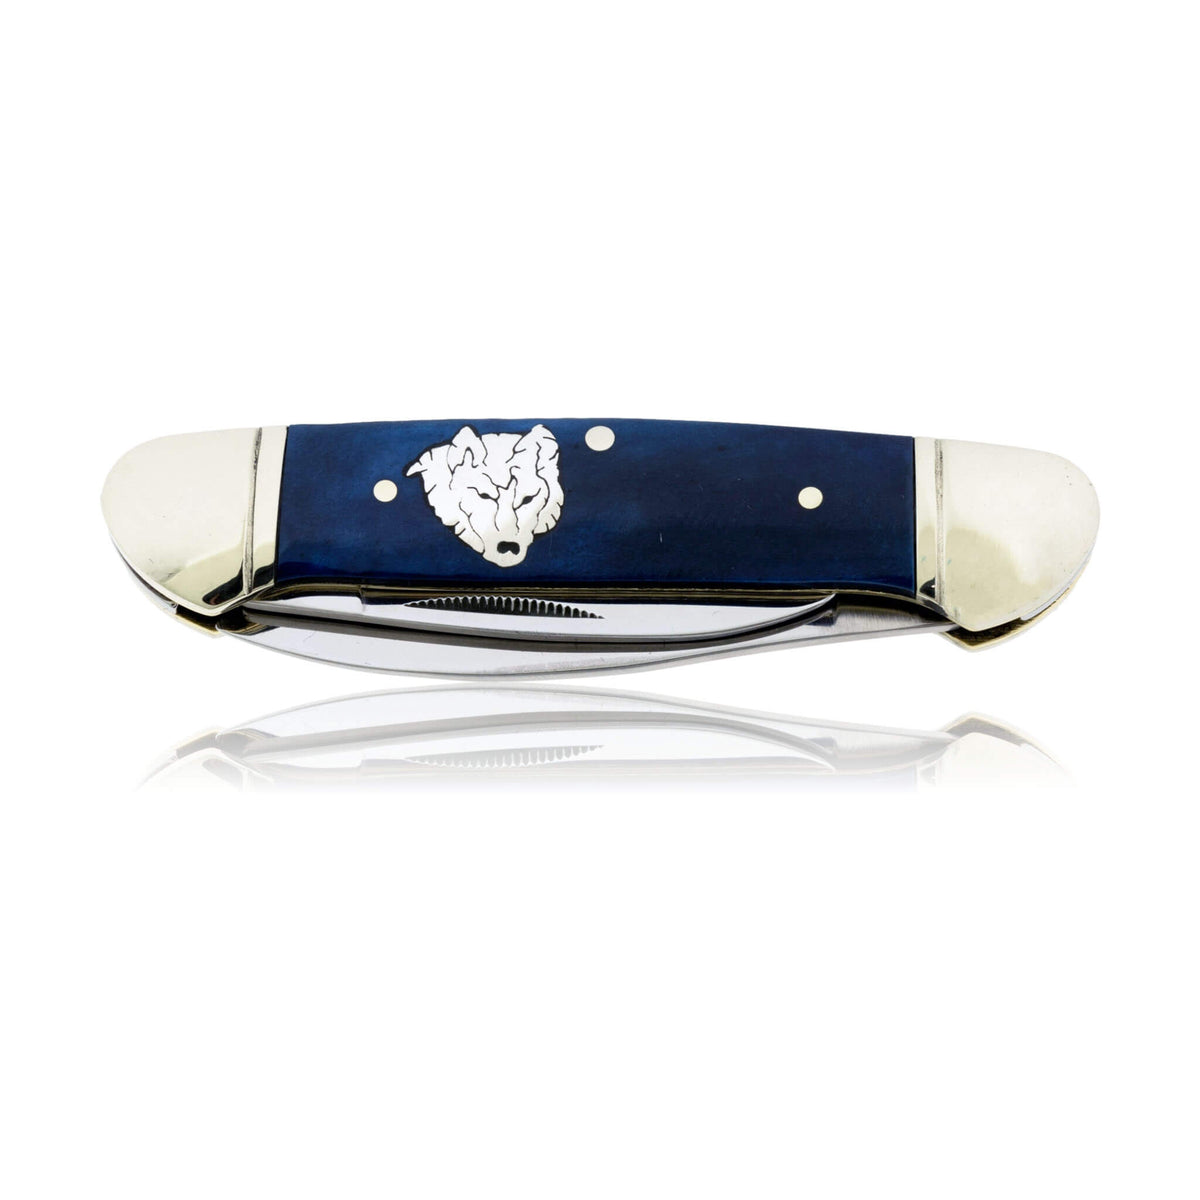 Blue Rough Rider 2 Blade Knife with Silver Elk Inlay - Park City Jewelers